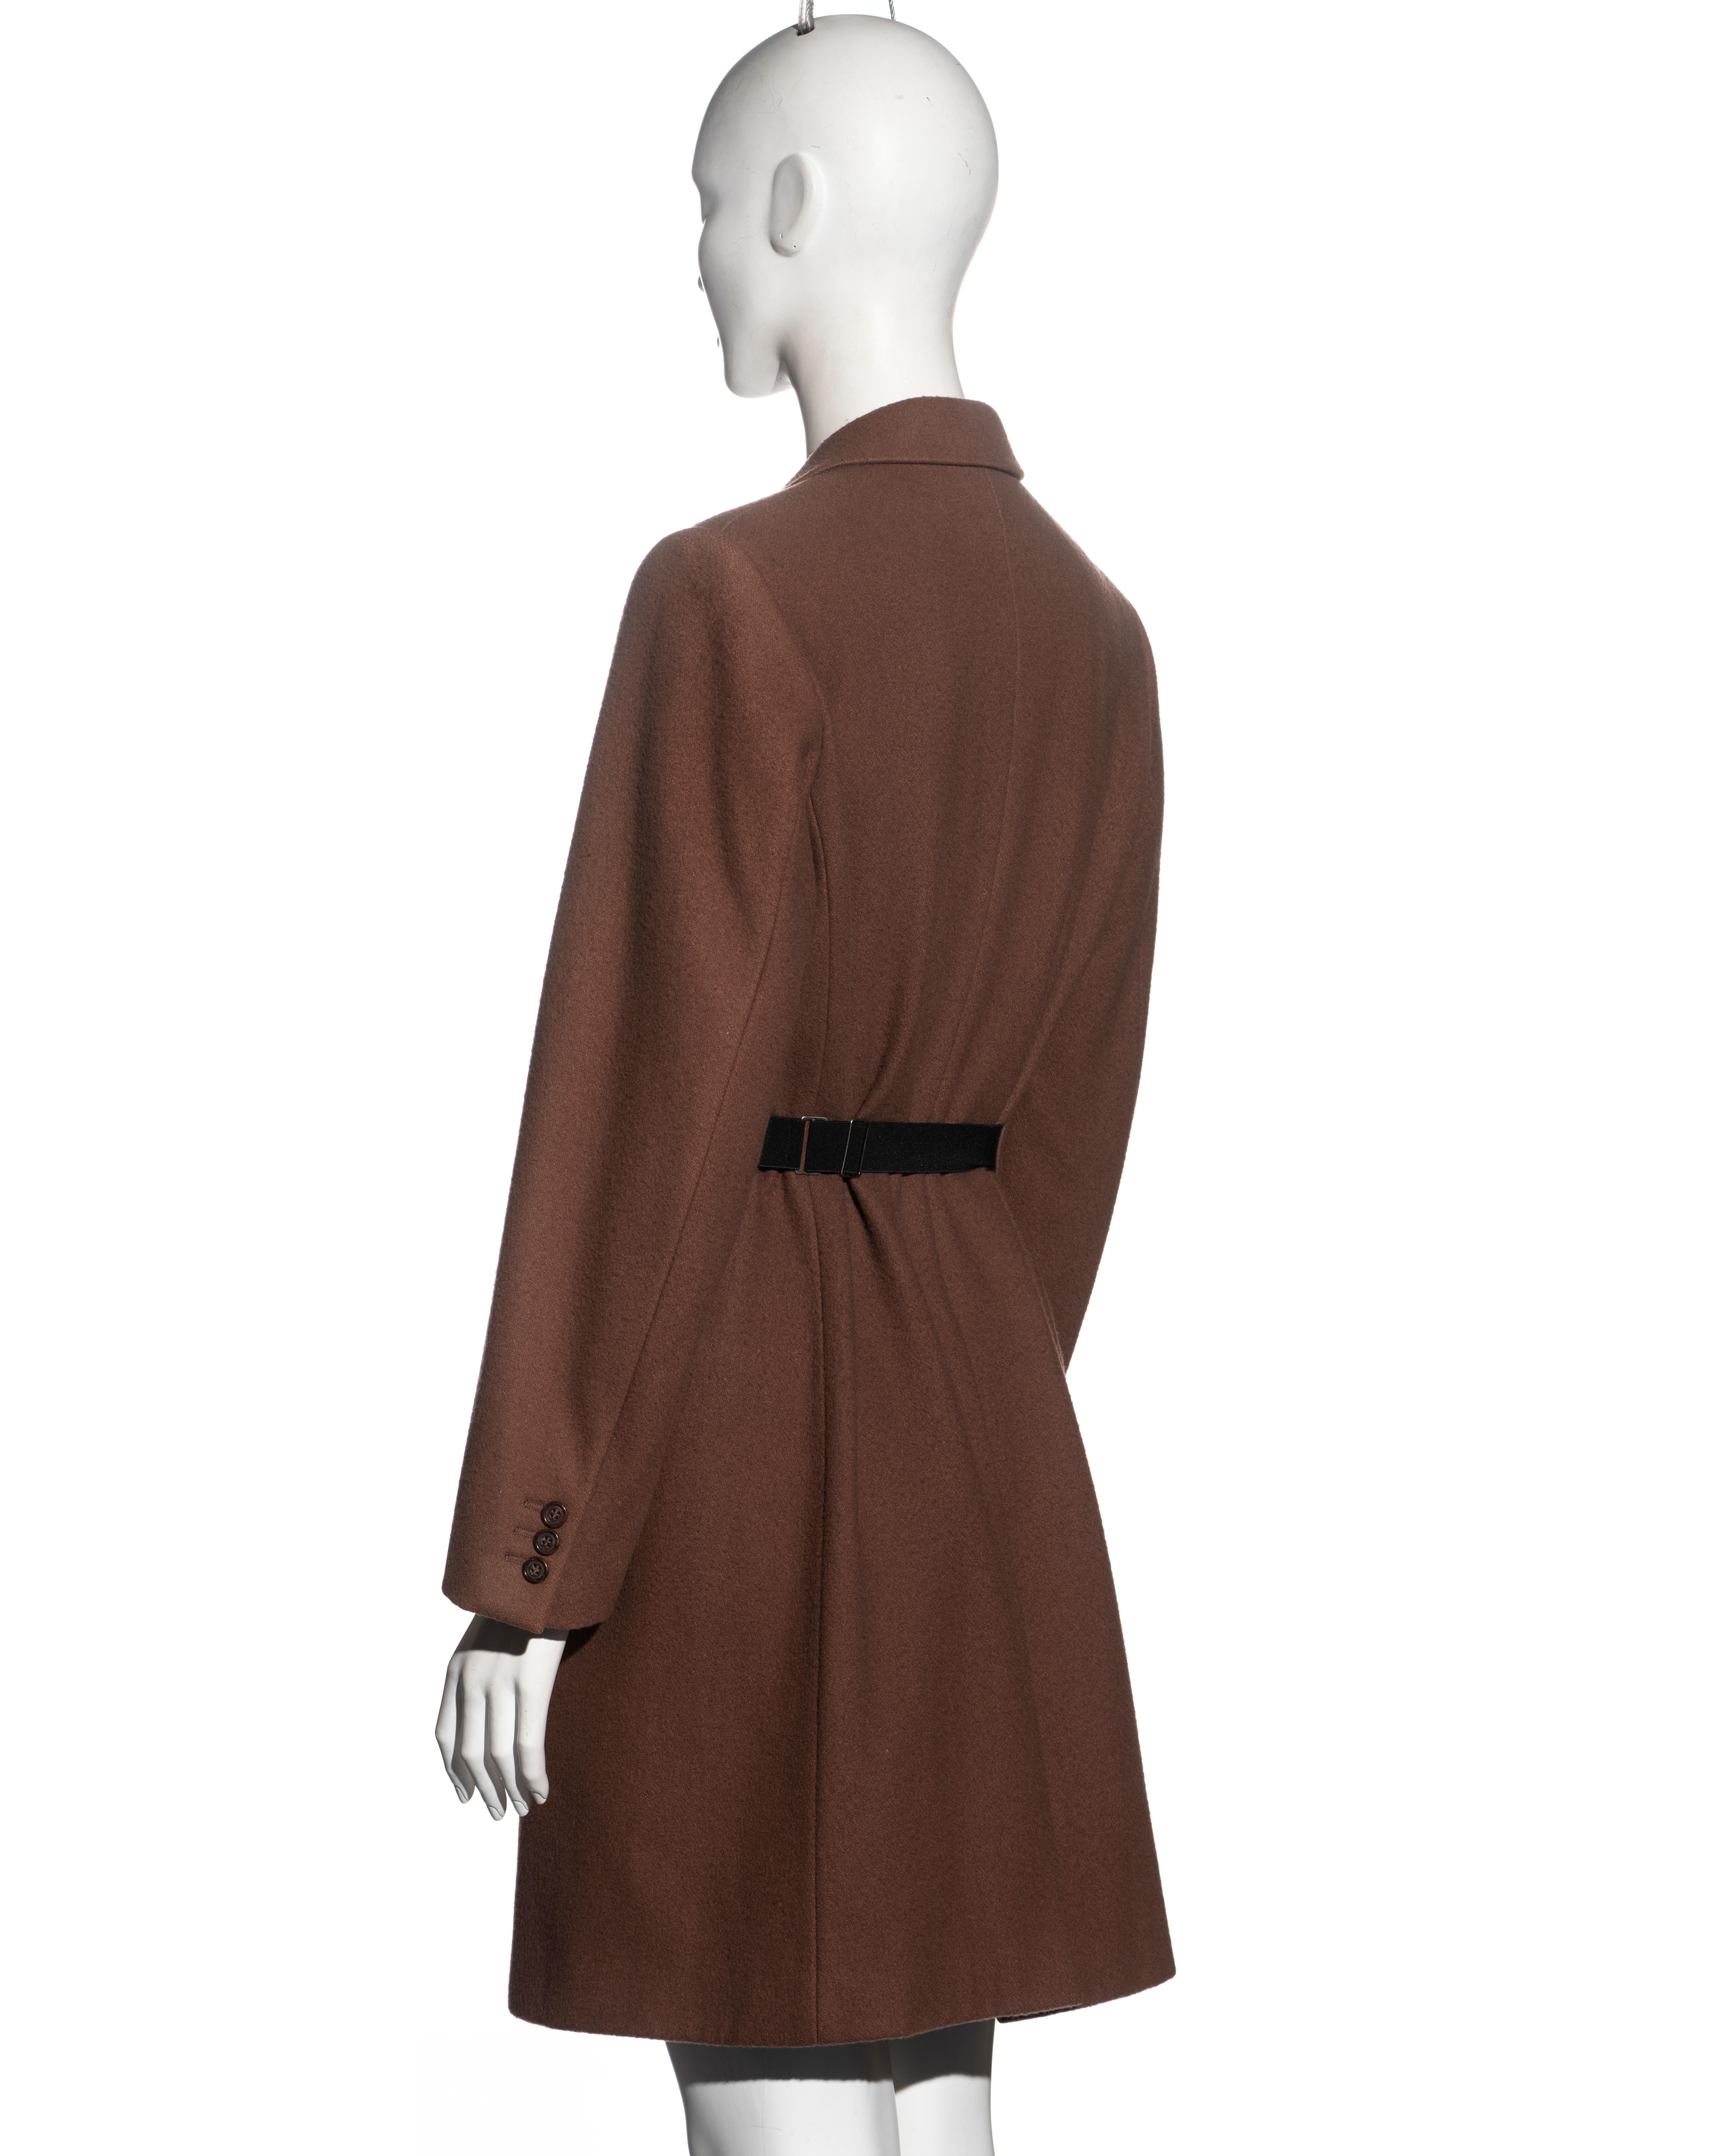 Martin Margiela brown wool coat with matching oversized belt, fw 1996 For Sale 4